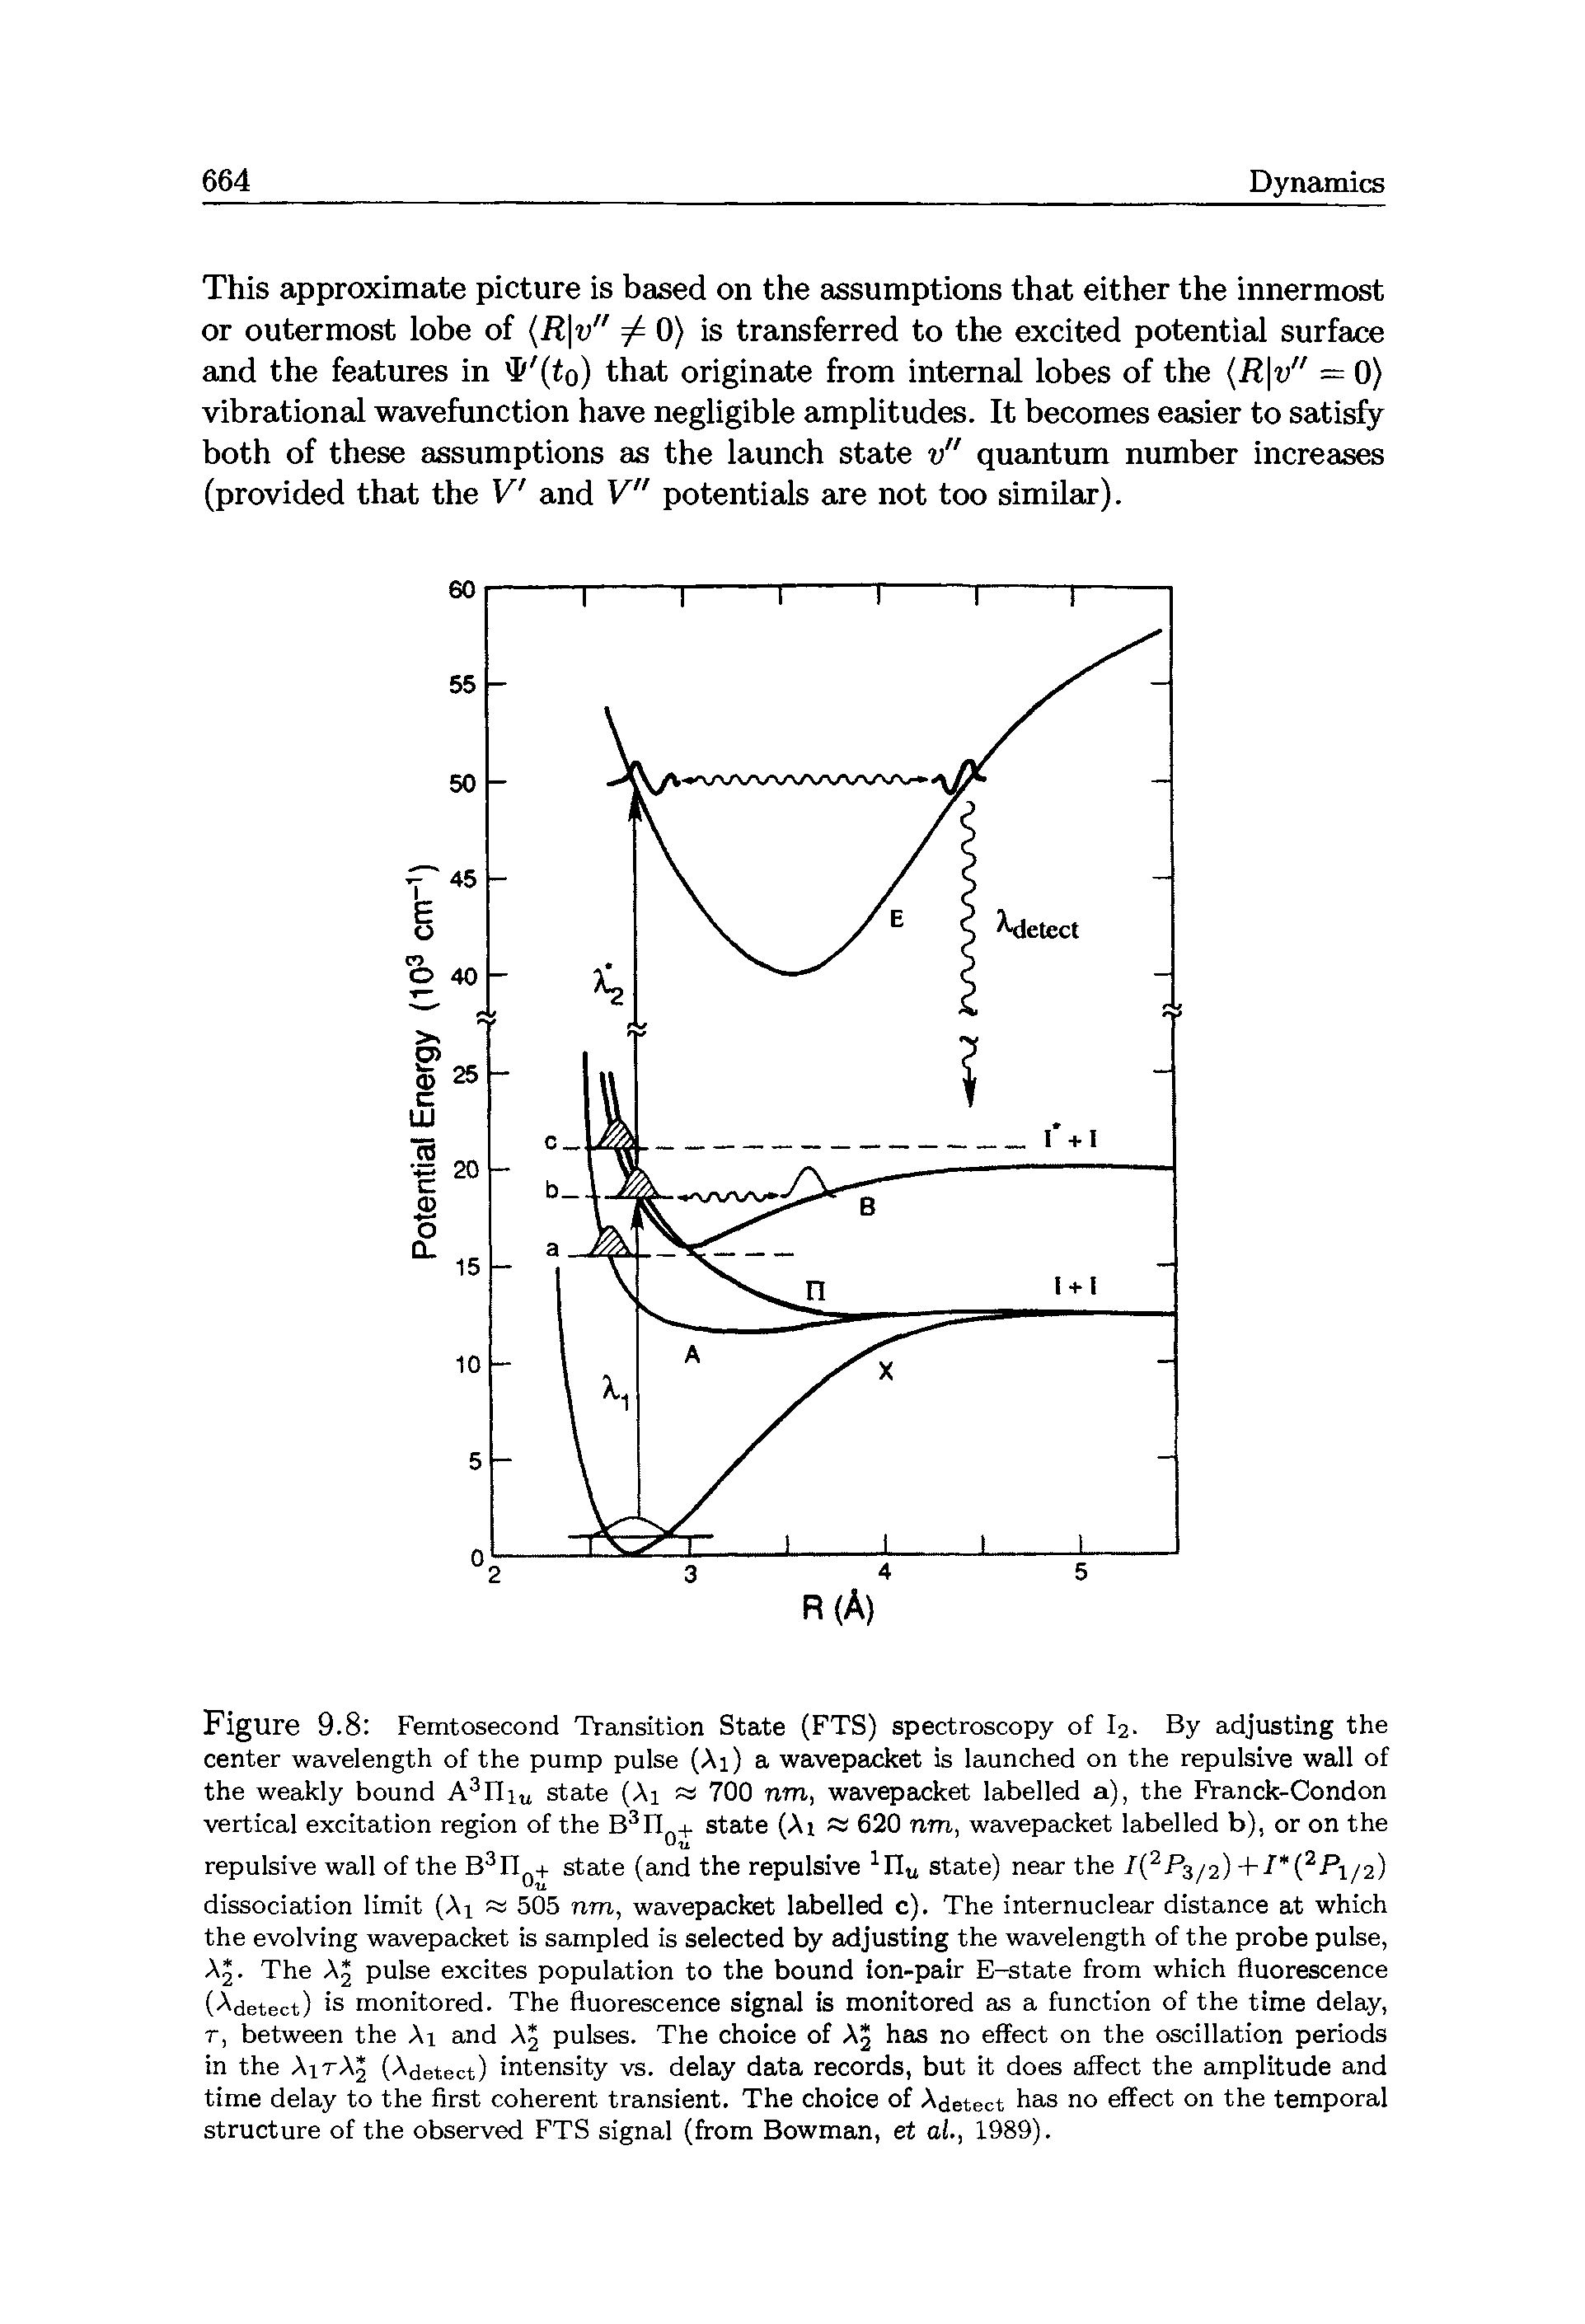 Figure 9.8 Femtosecond Transition State (FTS) spectroscopy of I2. By adjusting the center wavelength of the pump pulse (Ai) a wavepacket is launched on the repulsive wall of the weakly bound A3Ifiu state (Ai 700 nm, wavepacket labelled a), the Franck-Condon vertical excitation region of the B3If + state (Ai 620 nm, wavepacket labelled b), or on the repulsive wall of the B3If0+ state (and the repulsive 1Ifu state) near the I(2 P3/2) +1 P1/2)...